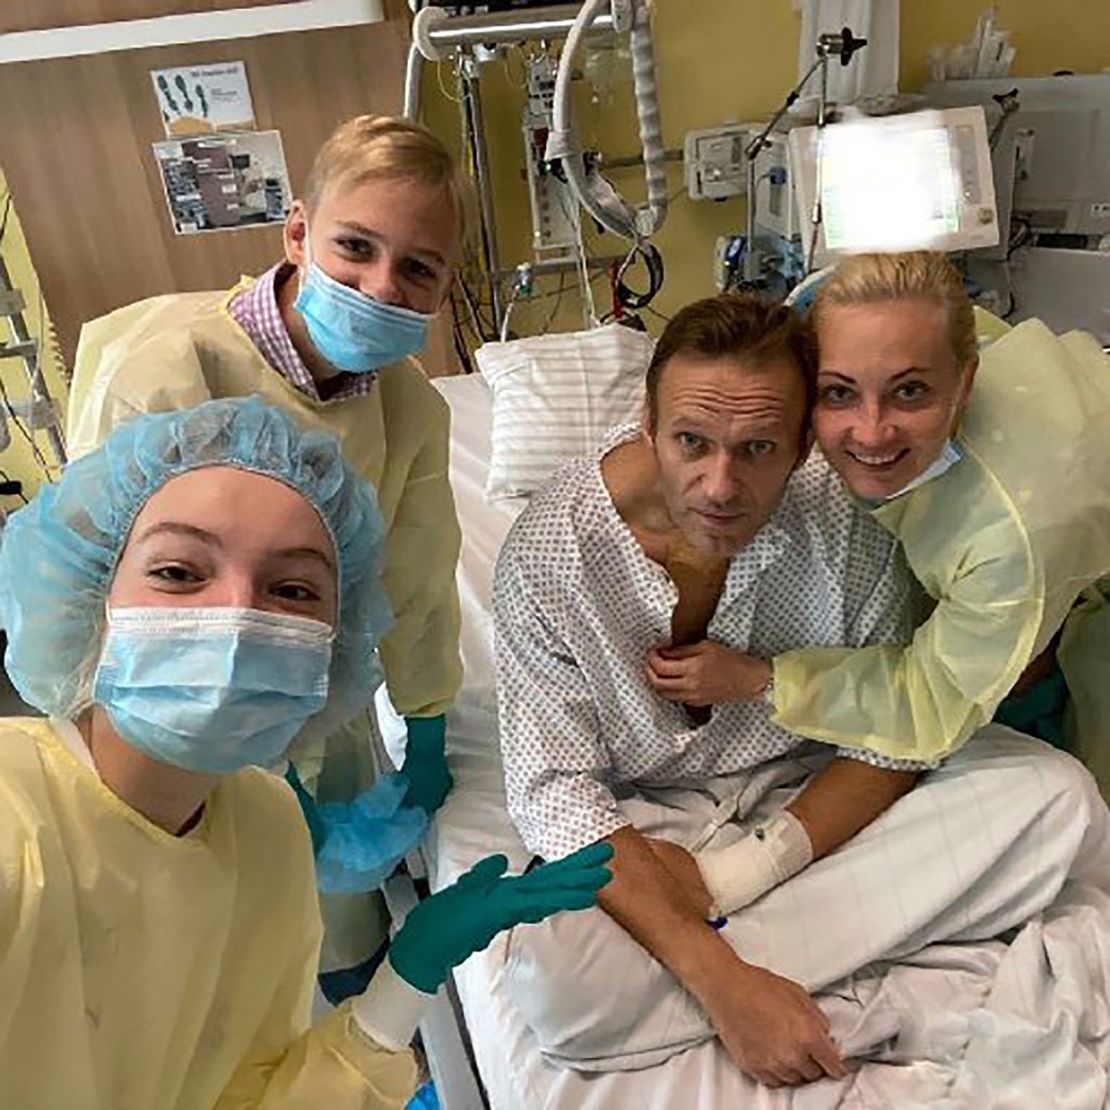 Alexey Navalny shares first picture of himself post-attack, from a hospital in Berlin, Germany, on Tuesday, September 15 with his daughter Daria, son Zahar and wife Yulia.